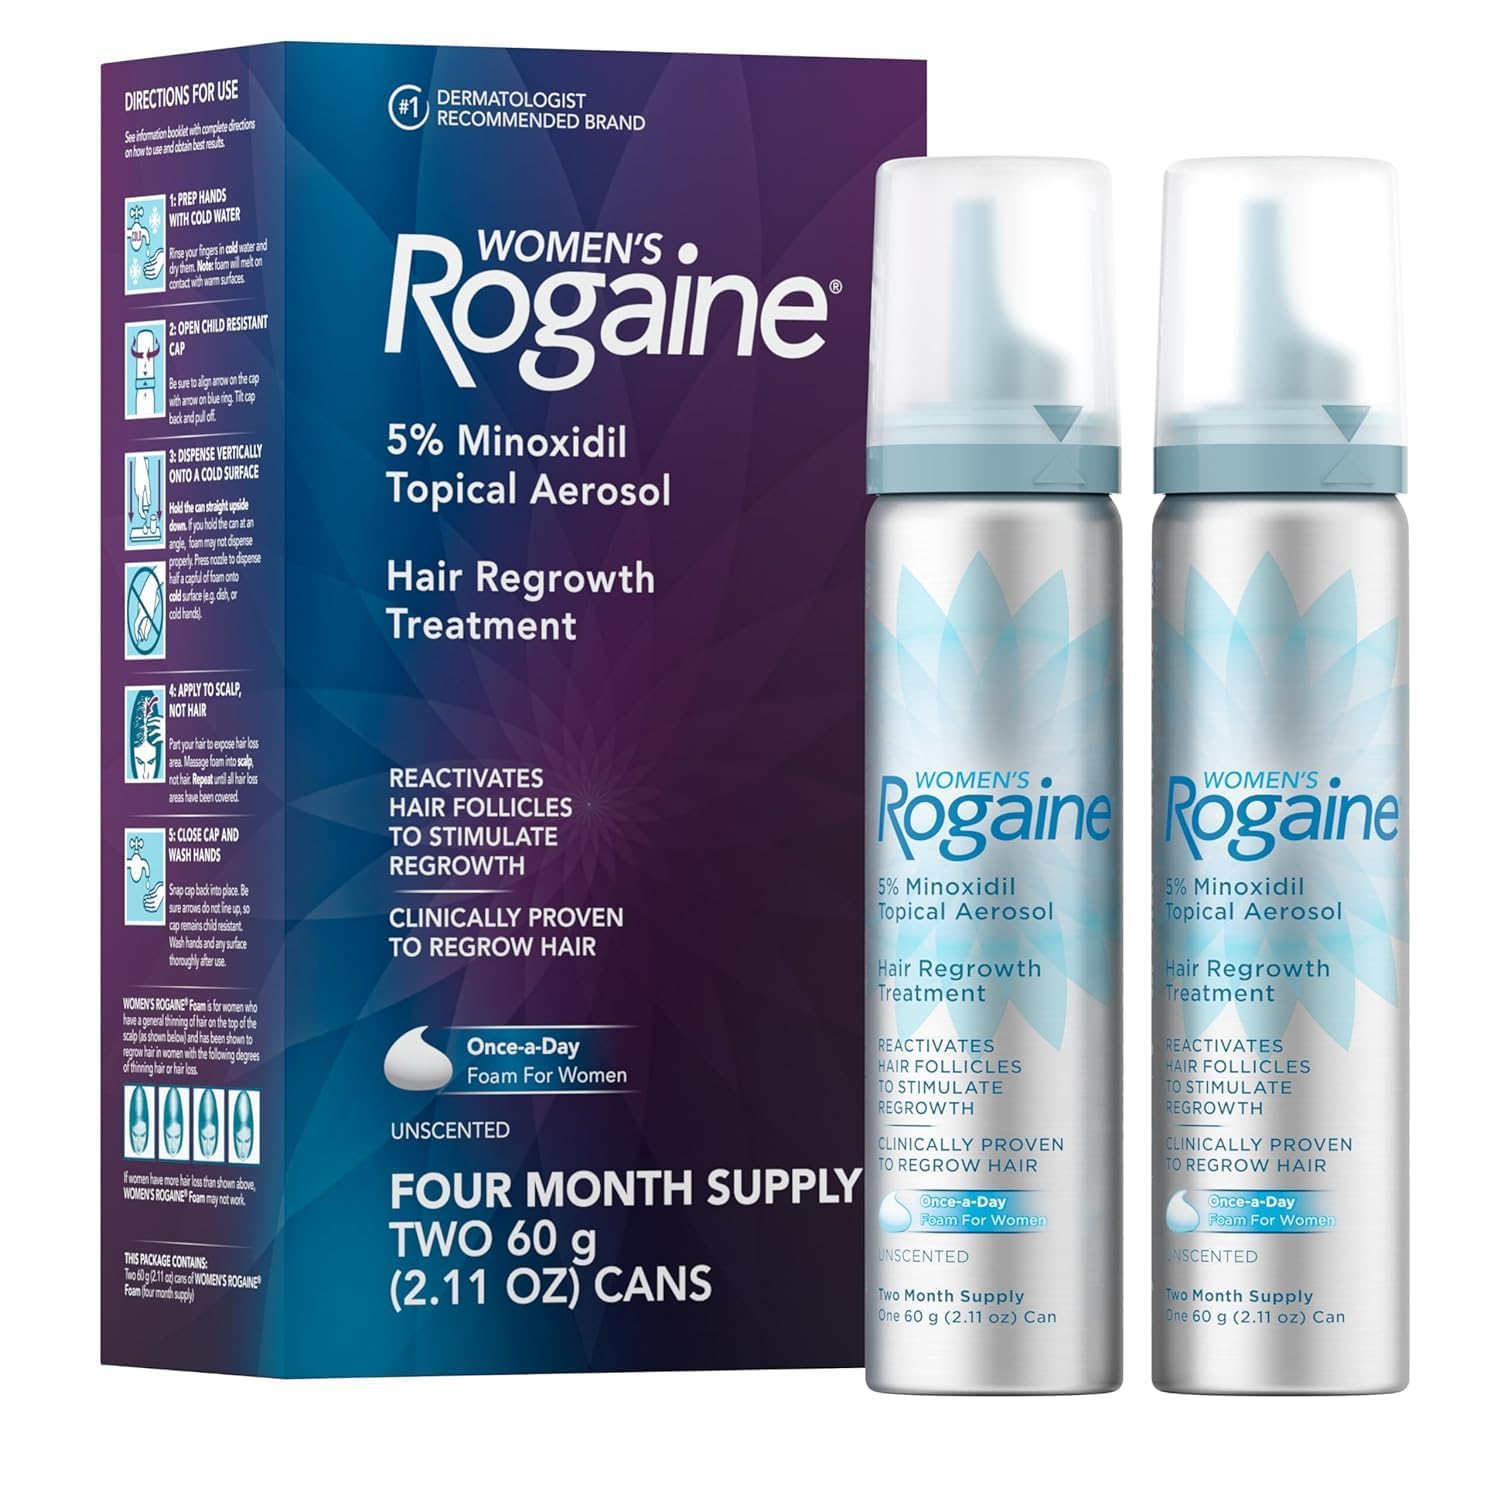 Women's Rogaine 5% Minoxidil Foam, Topical Once-A-Day Hair Loss Treatment for Women to Regrow Fuller, Thicker Hair, Unscented, 4-Month Supply, 2 x 2.11 oz